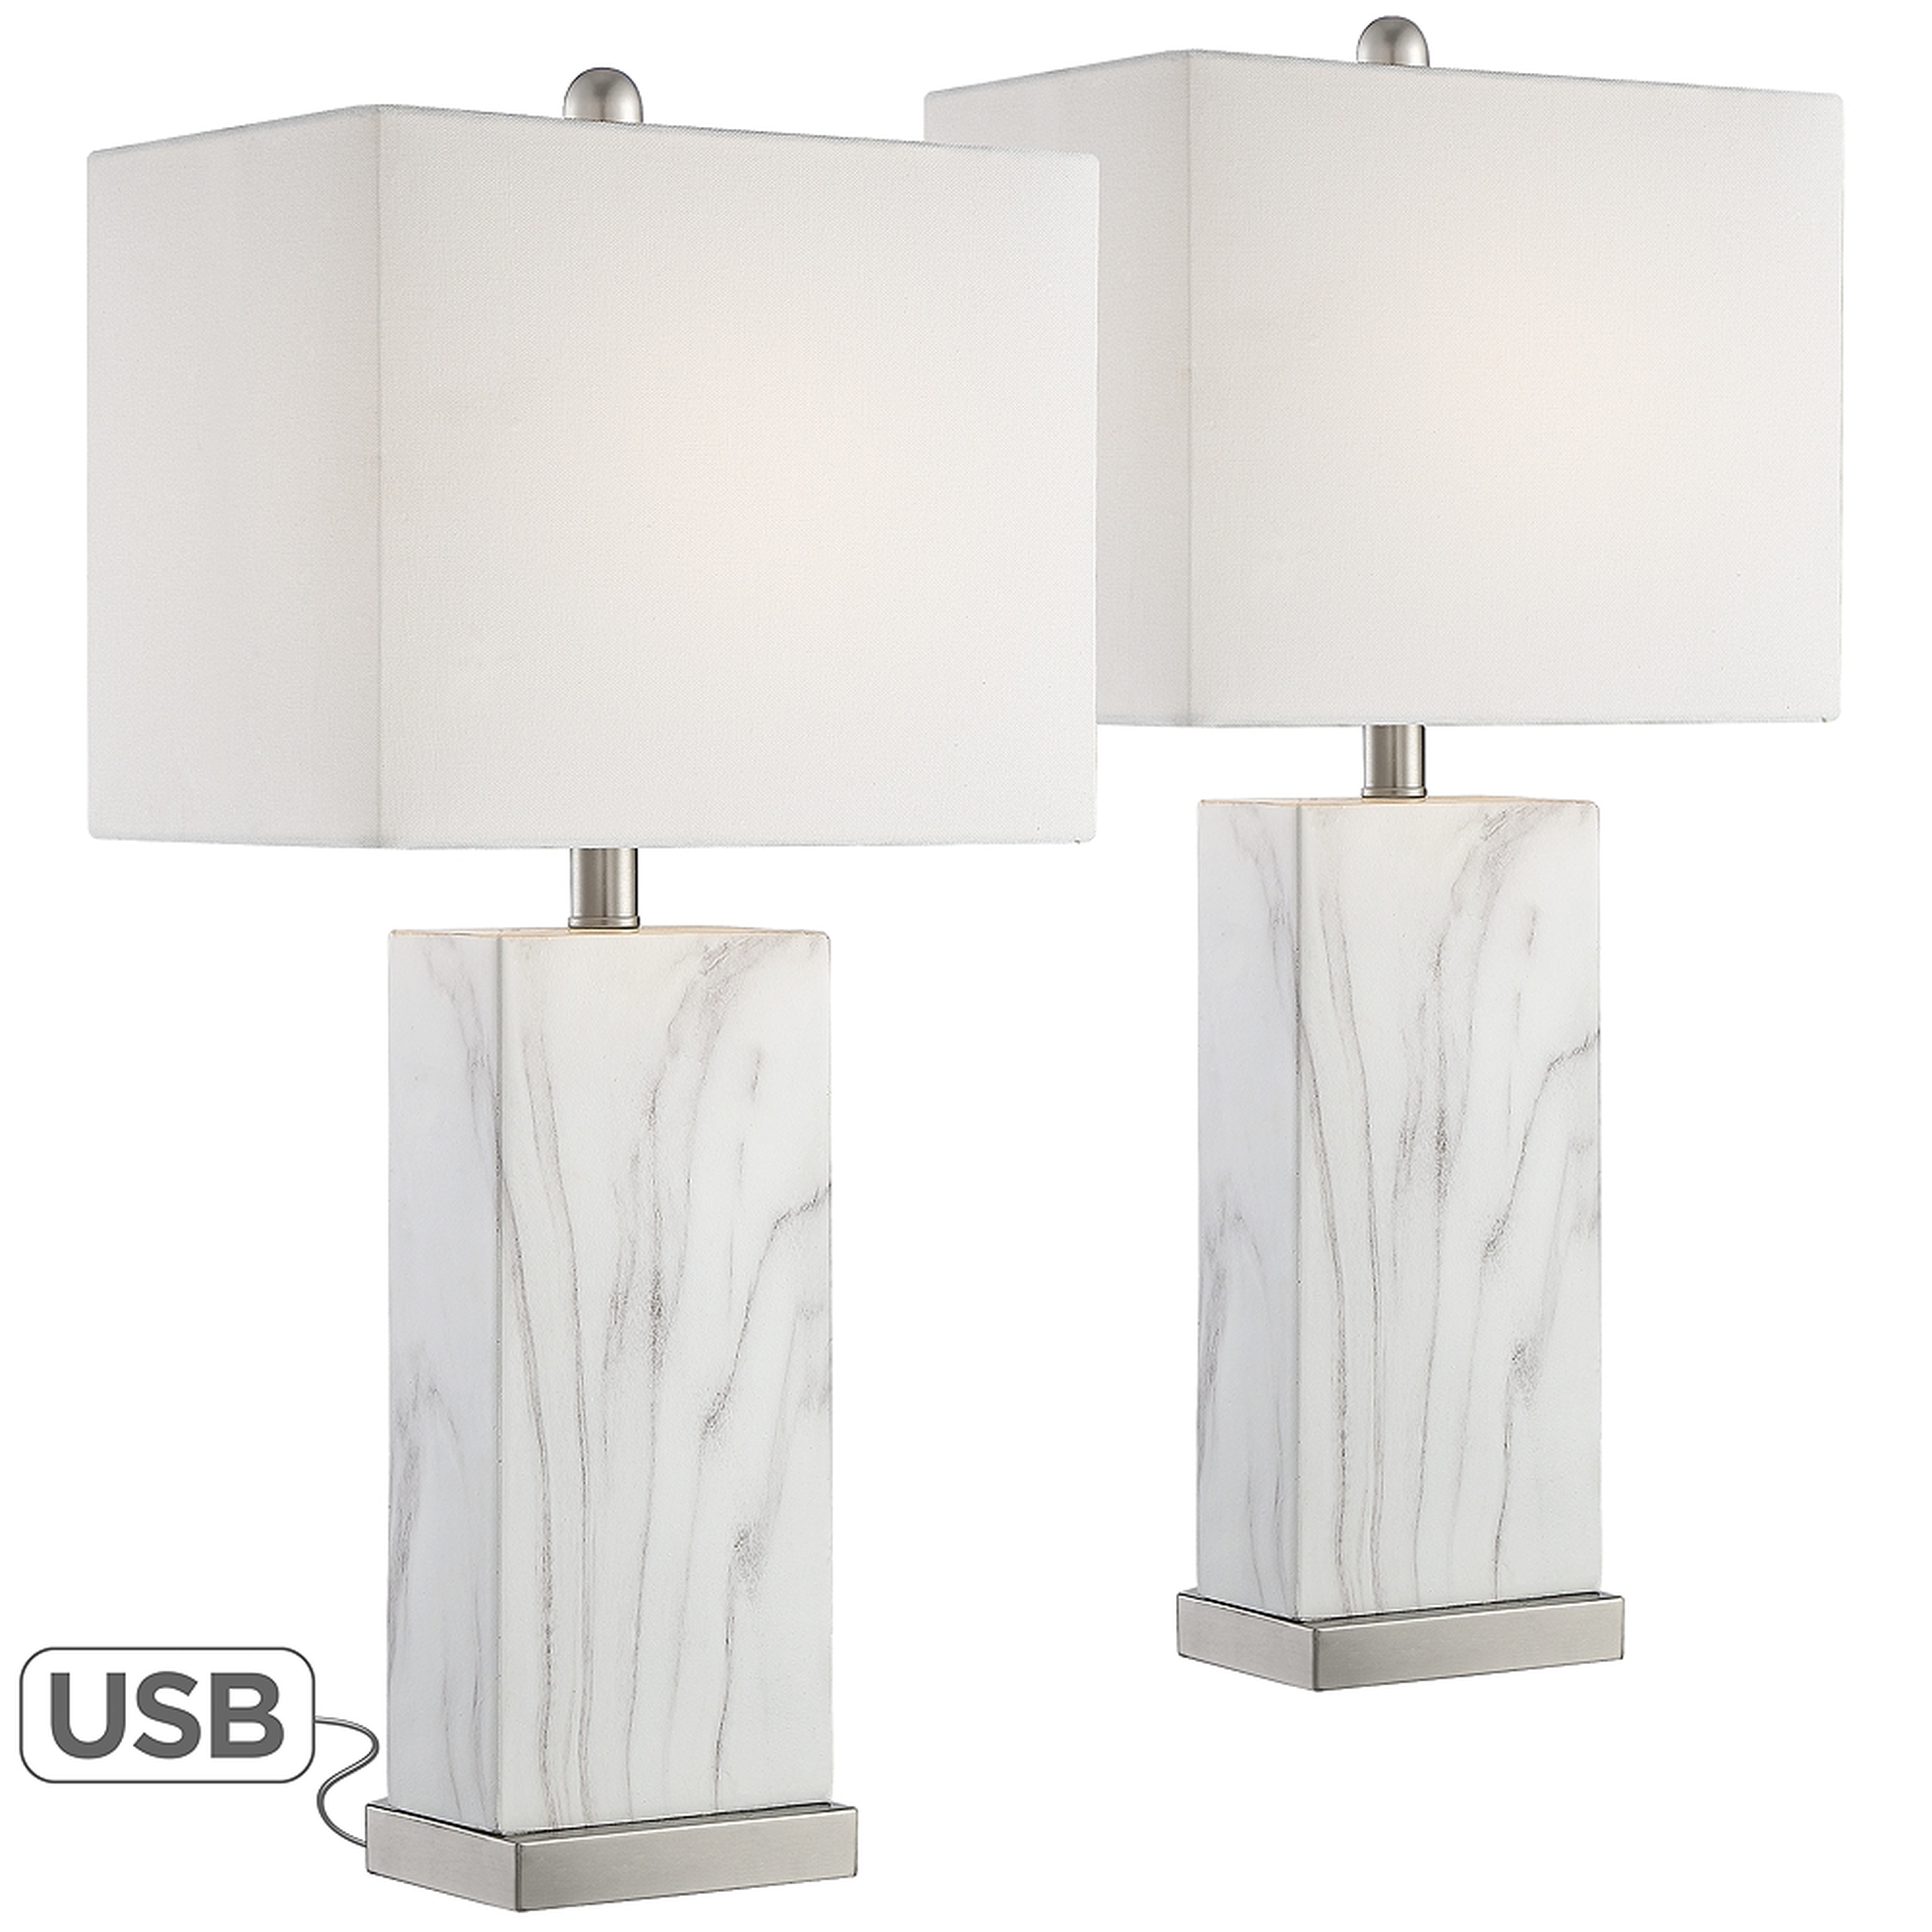 Connie White Faux Marble USB Table Lamps Set of 2 - Style # 75E84 - Lamps Plus